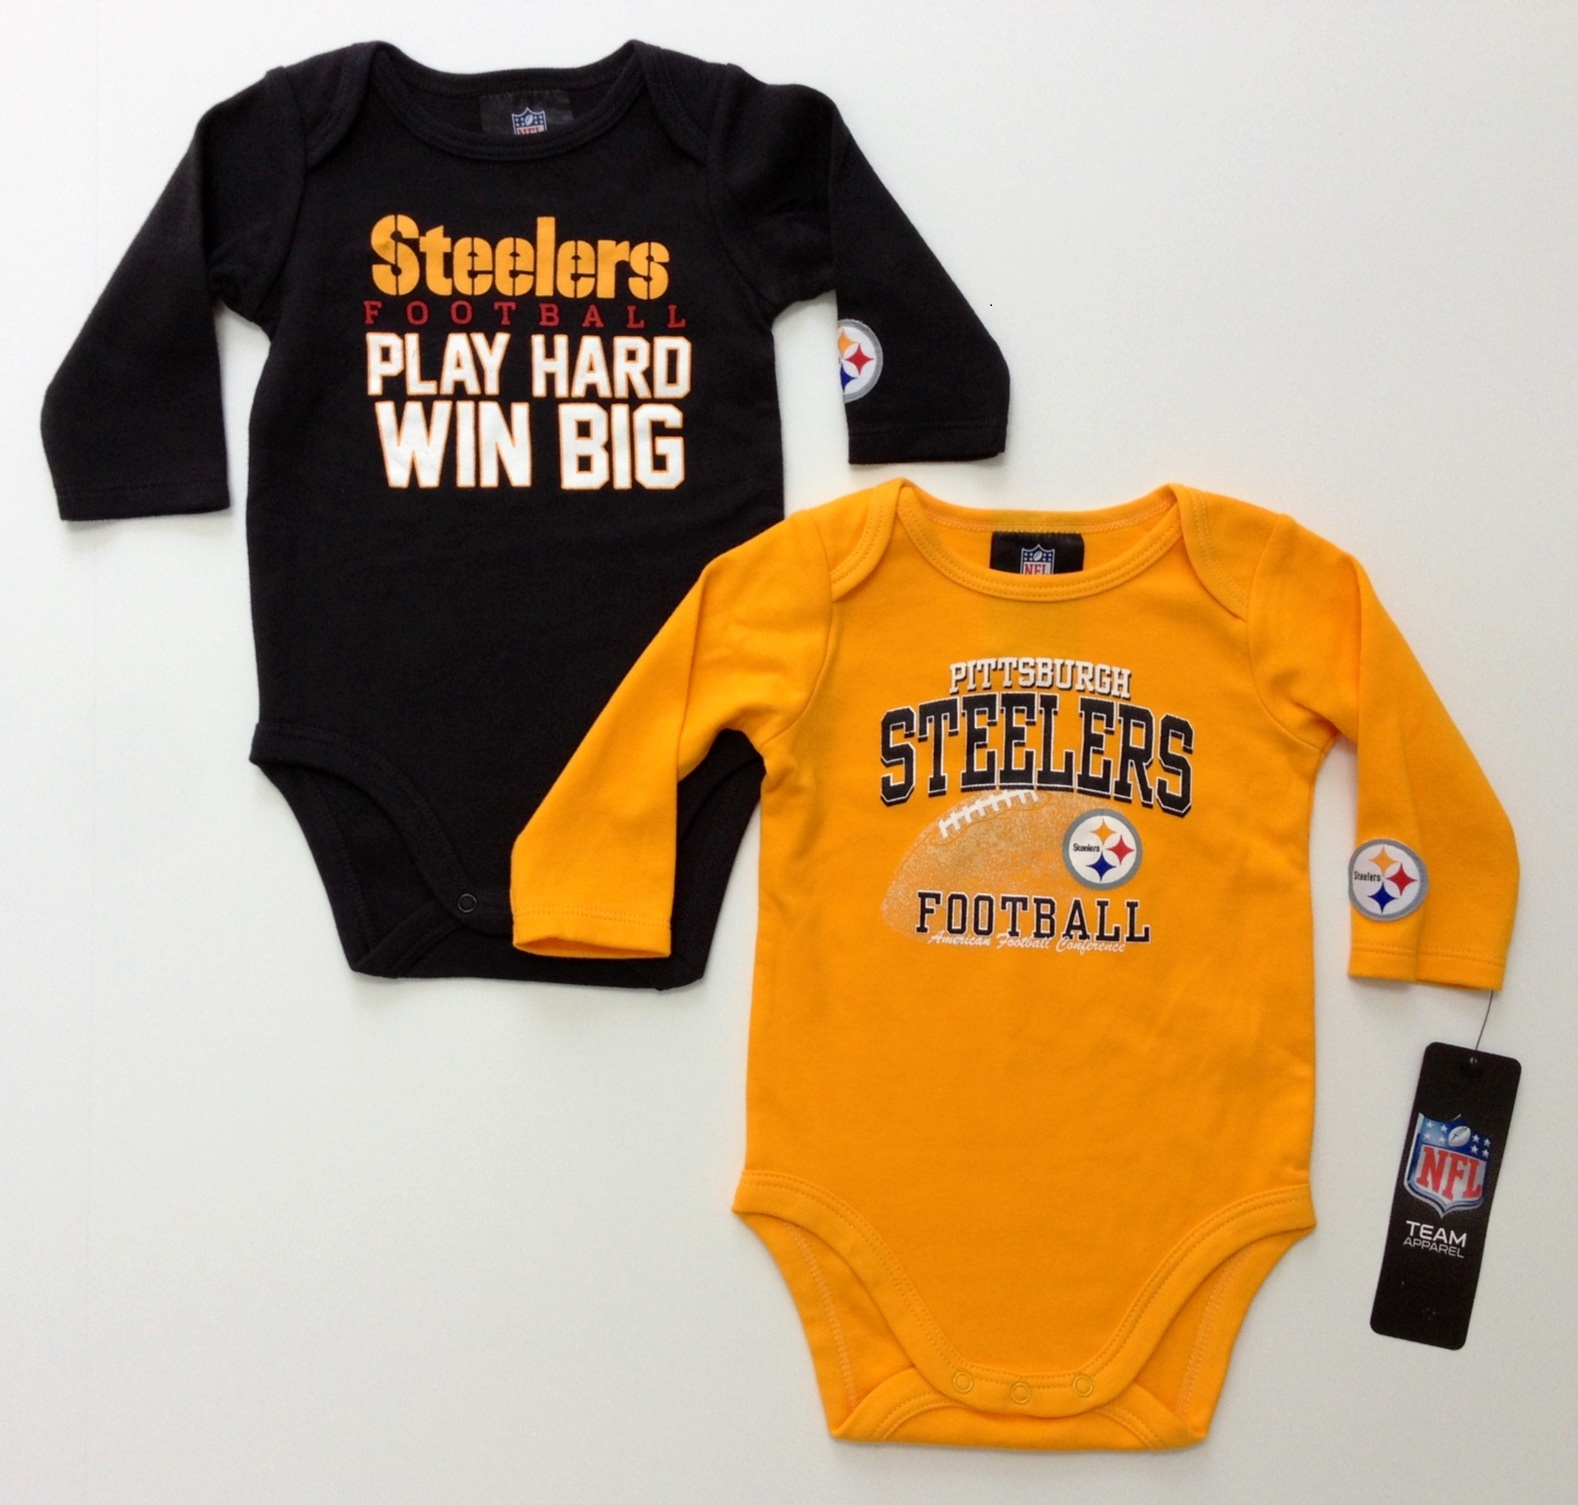 Pittsburgh Steelers Baby Clothing, Steelers Infant Jerseys, Toddler Apparel